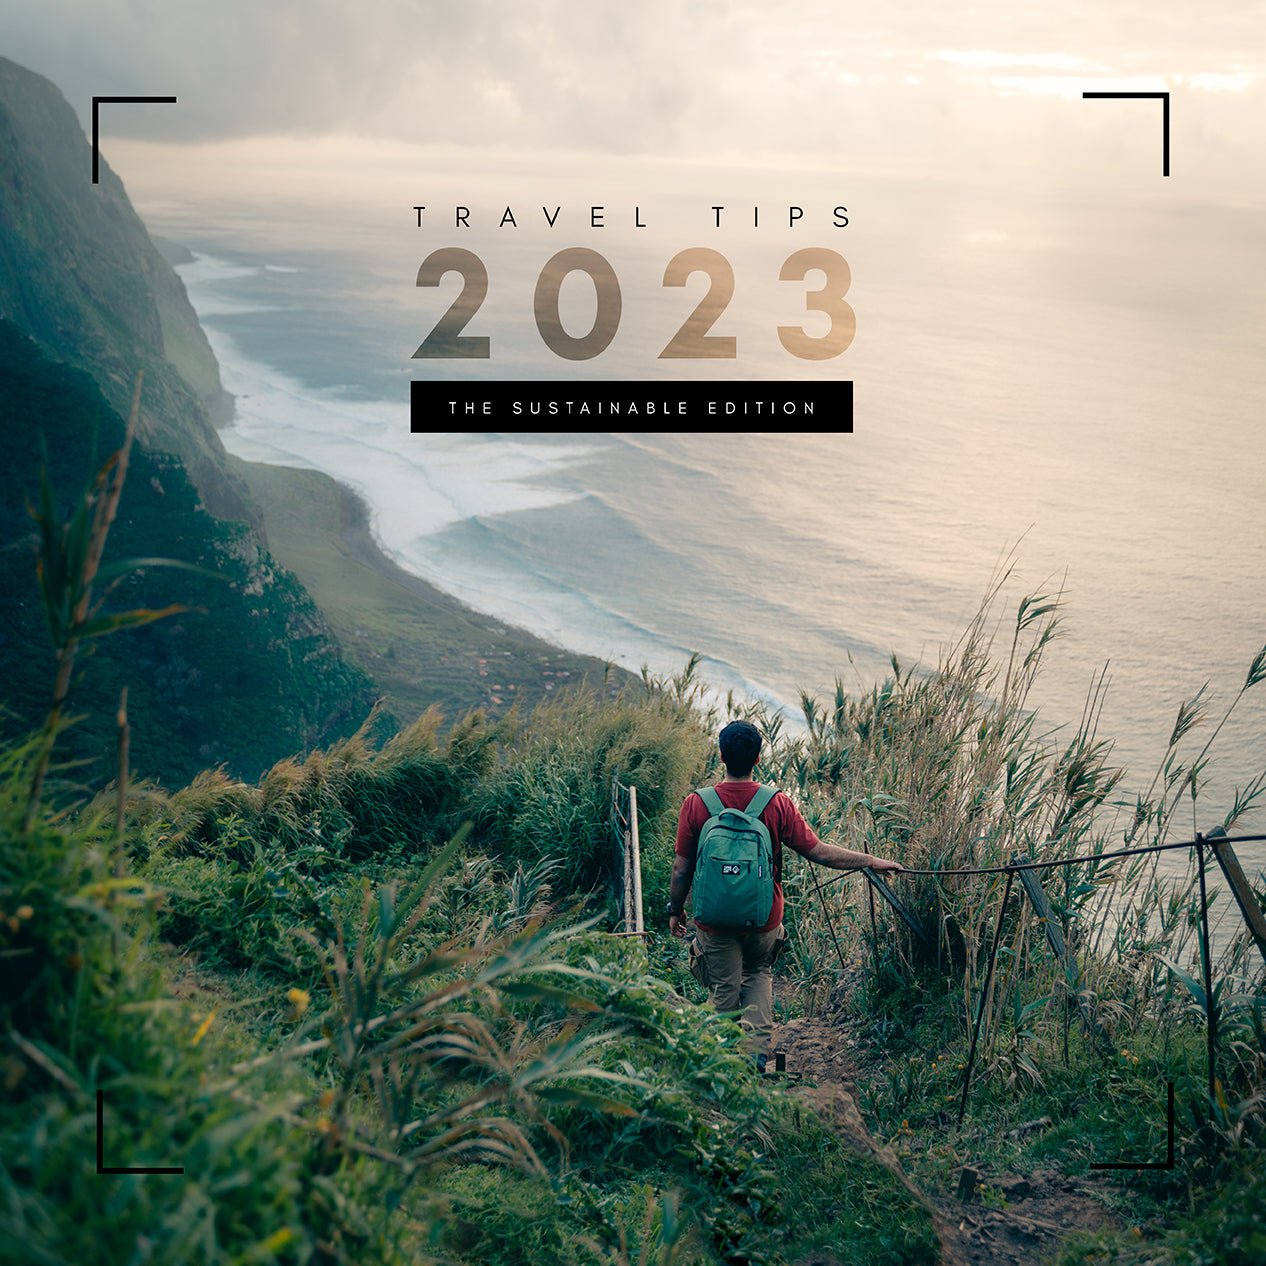 Travel Tips - The Sustainable Edition 2023 ⛰️ - Three Peaks GBR